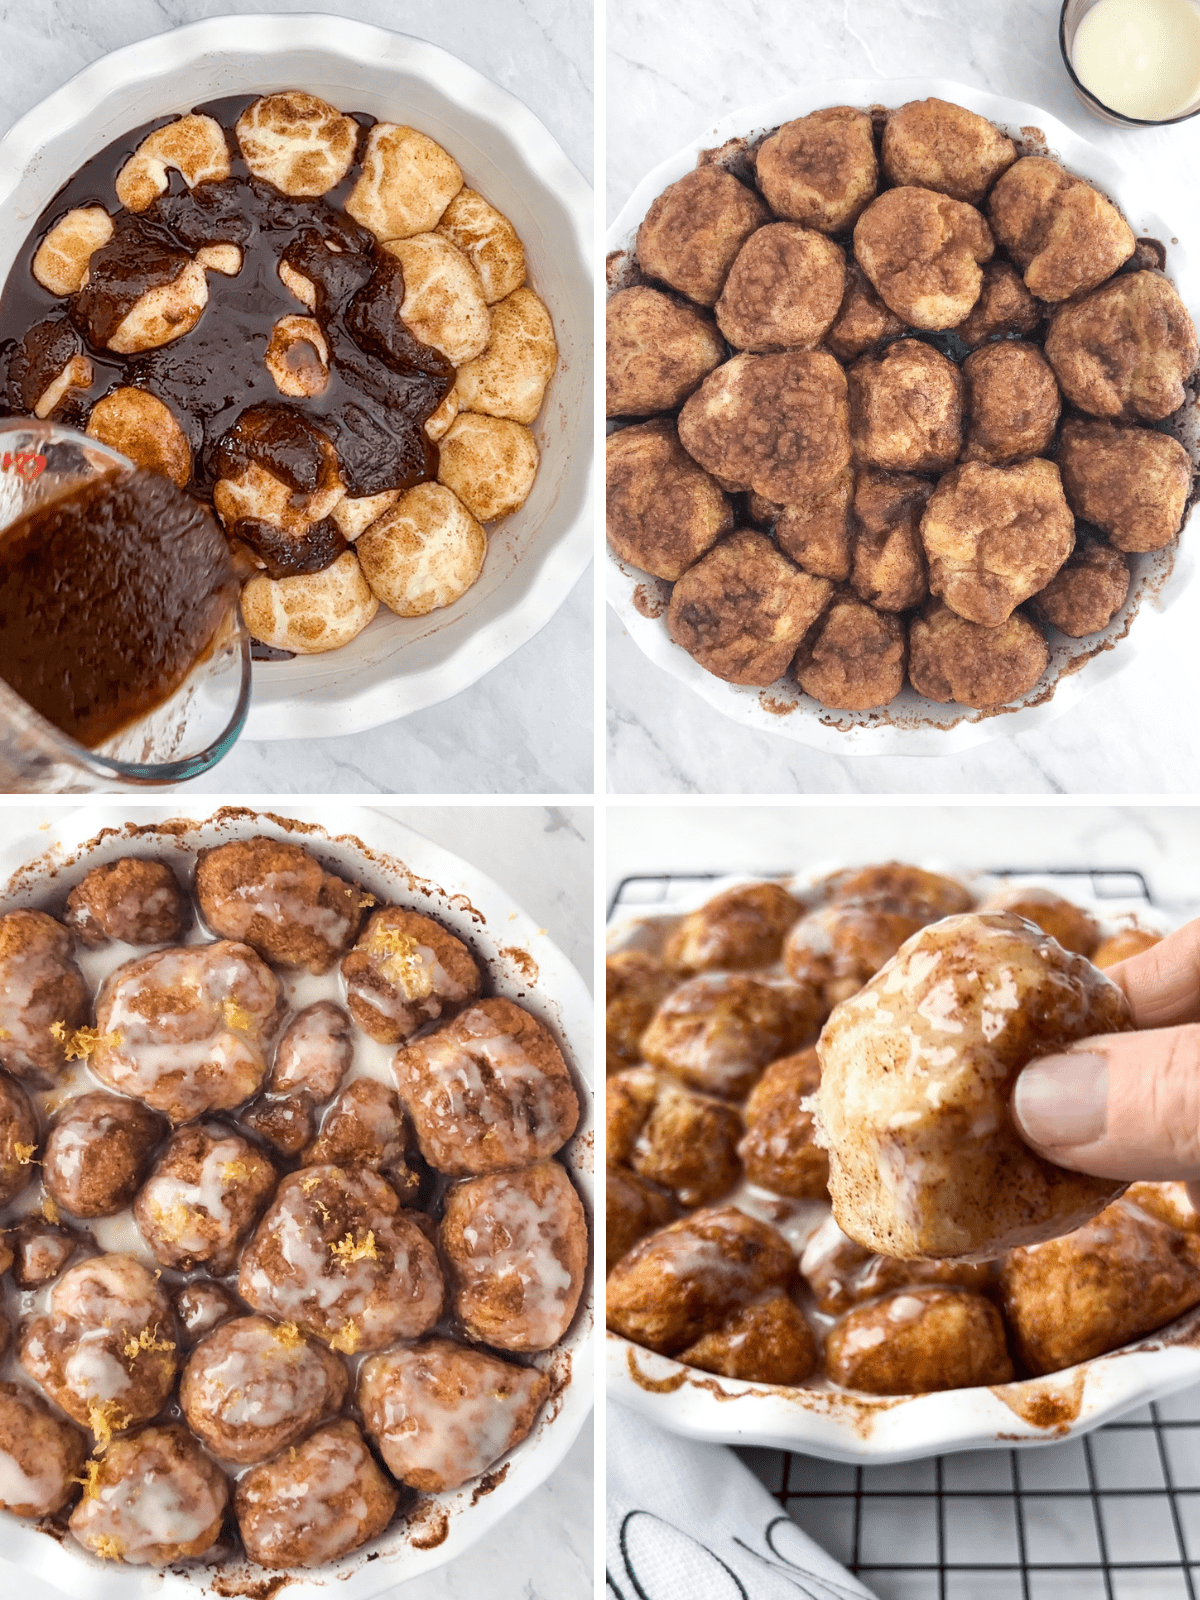 Four process shots including pouring brown sugar sauce on dough balls, proofing the bread and the final baked monkey bread.